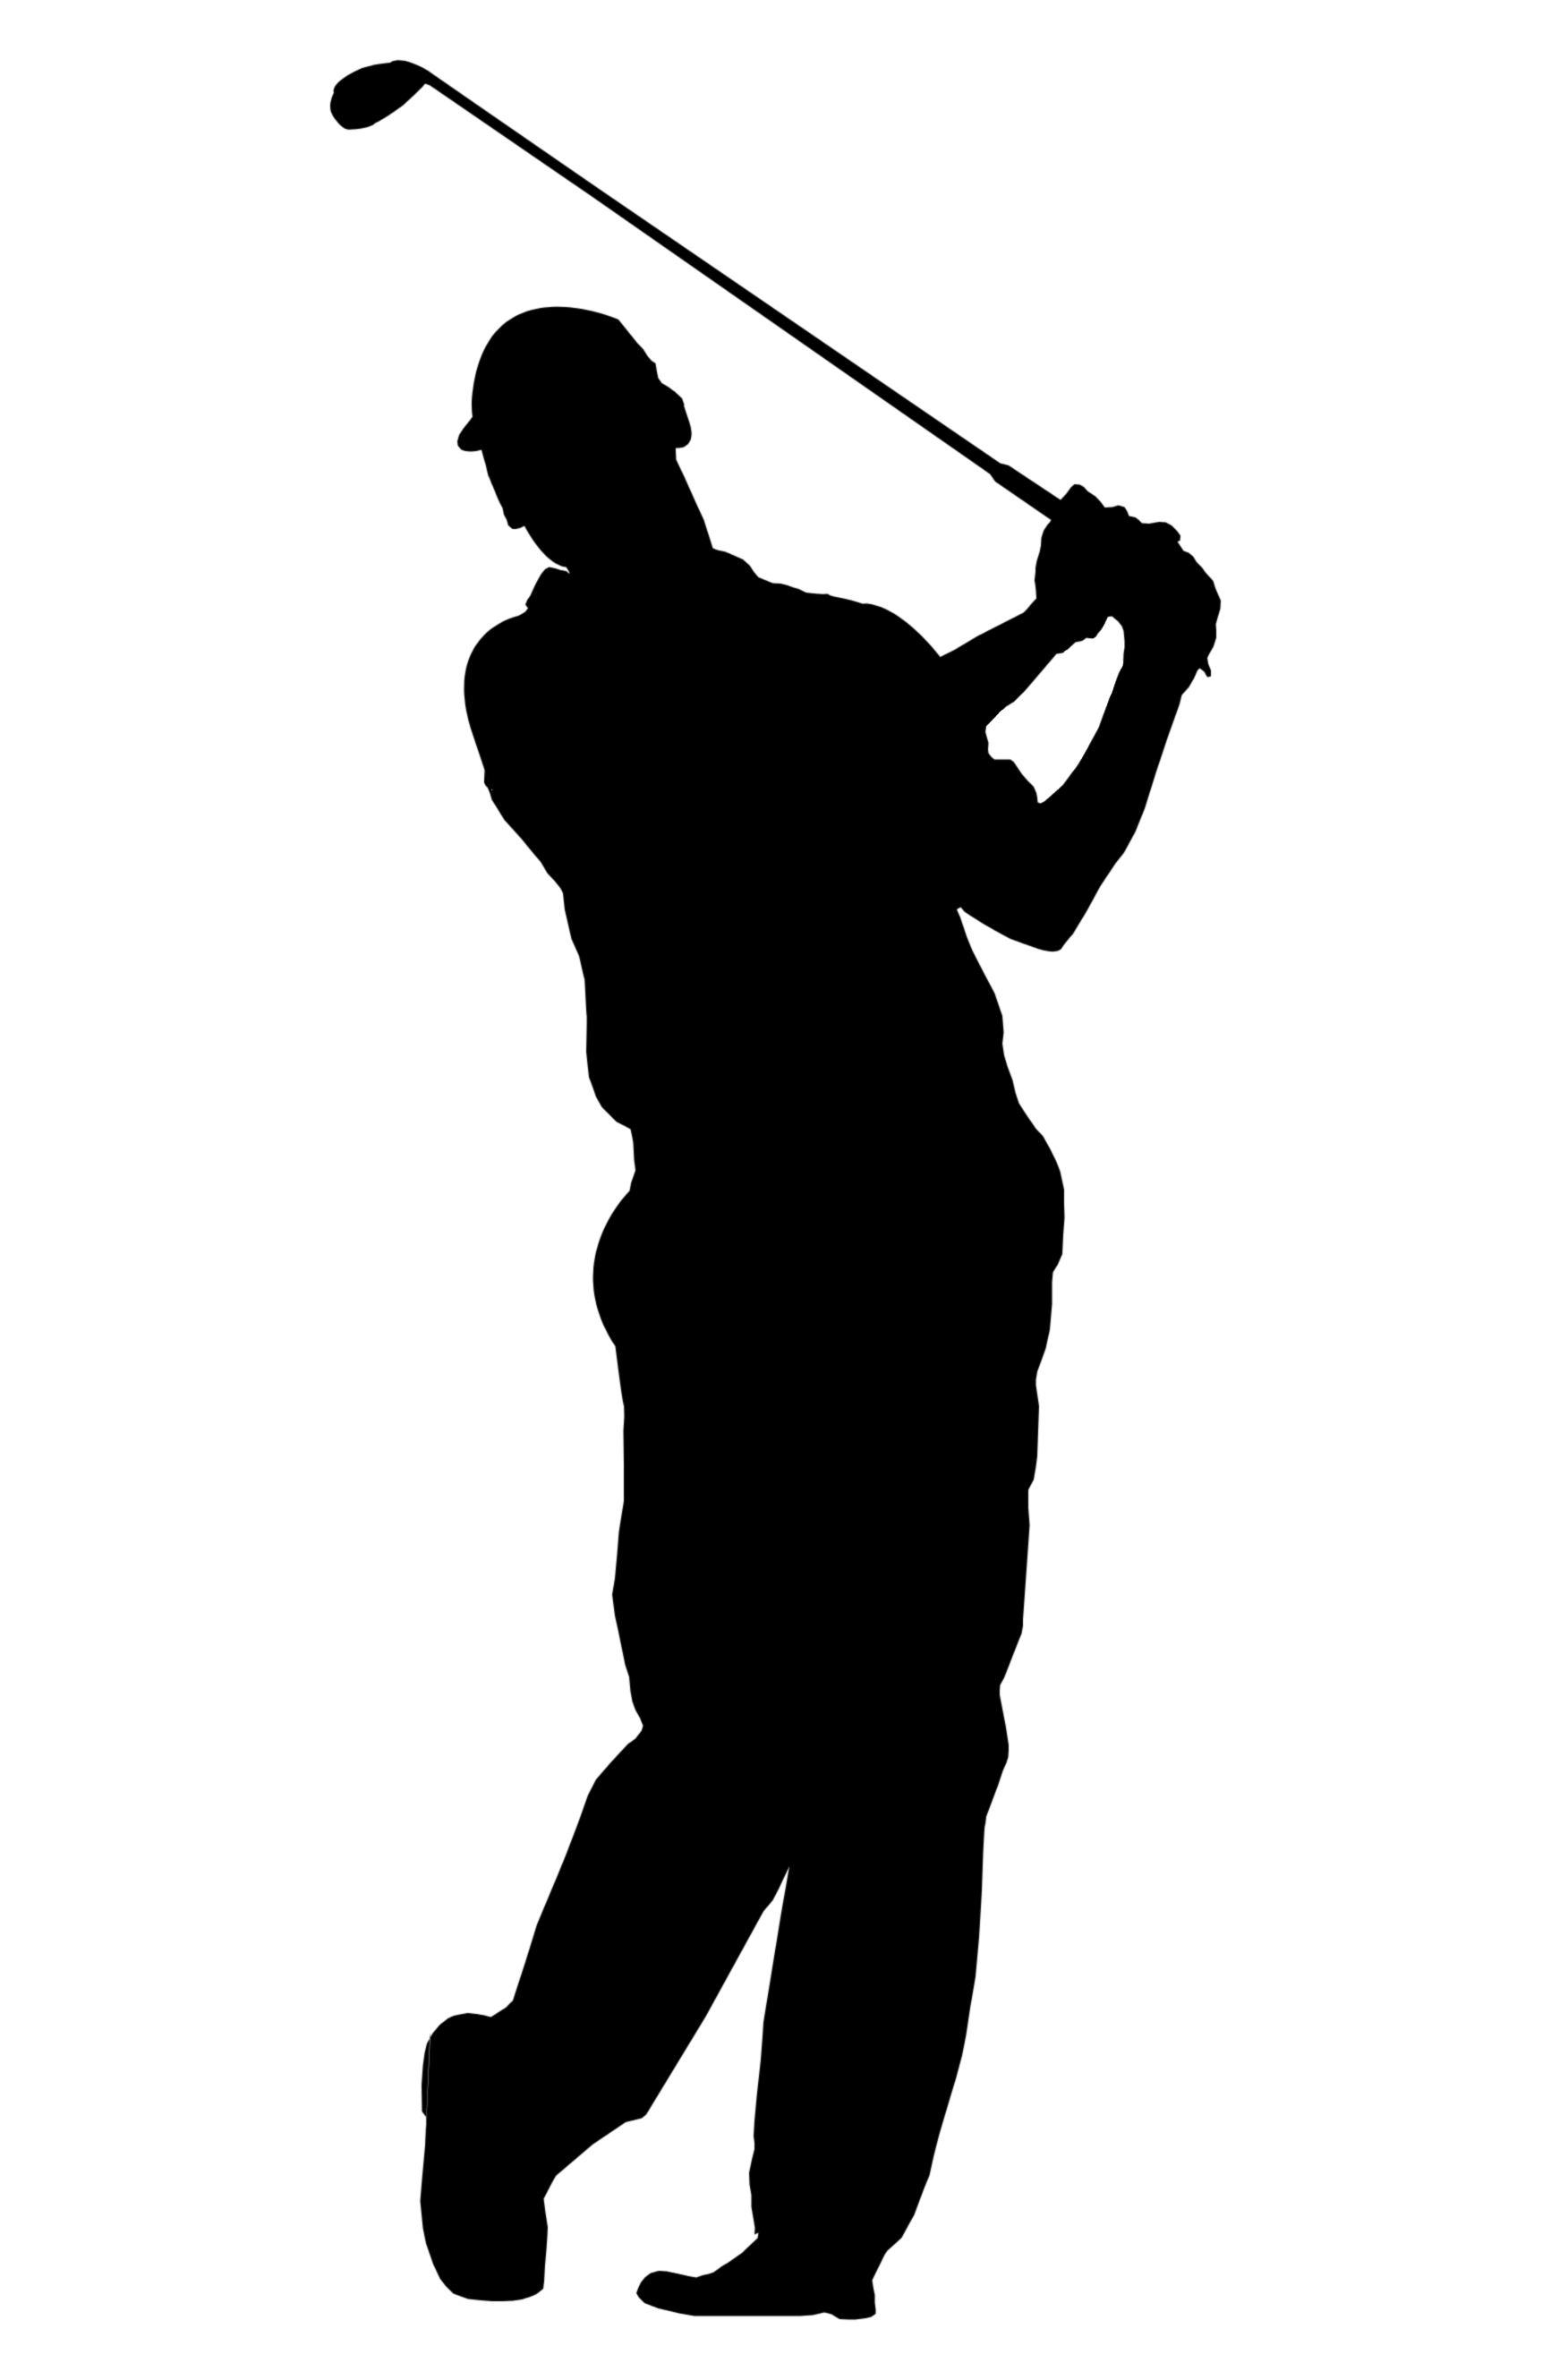 Golfer Silhouette Clip Art Free Cliparts That You Can Download To